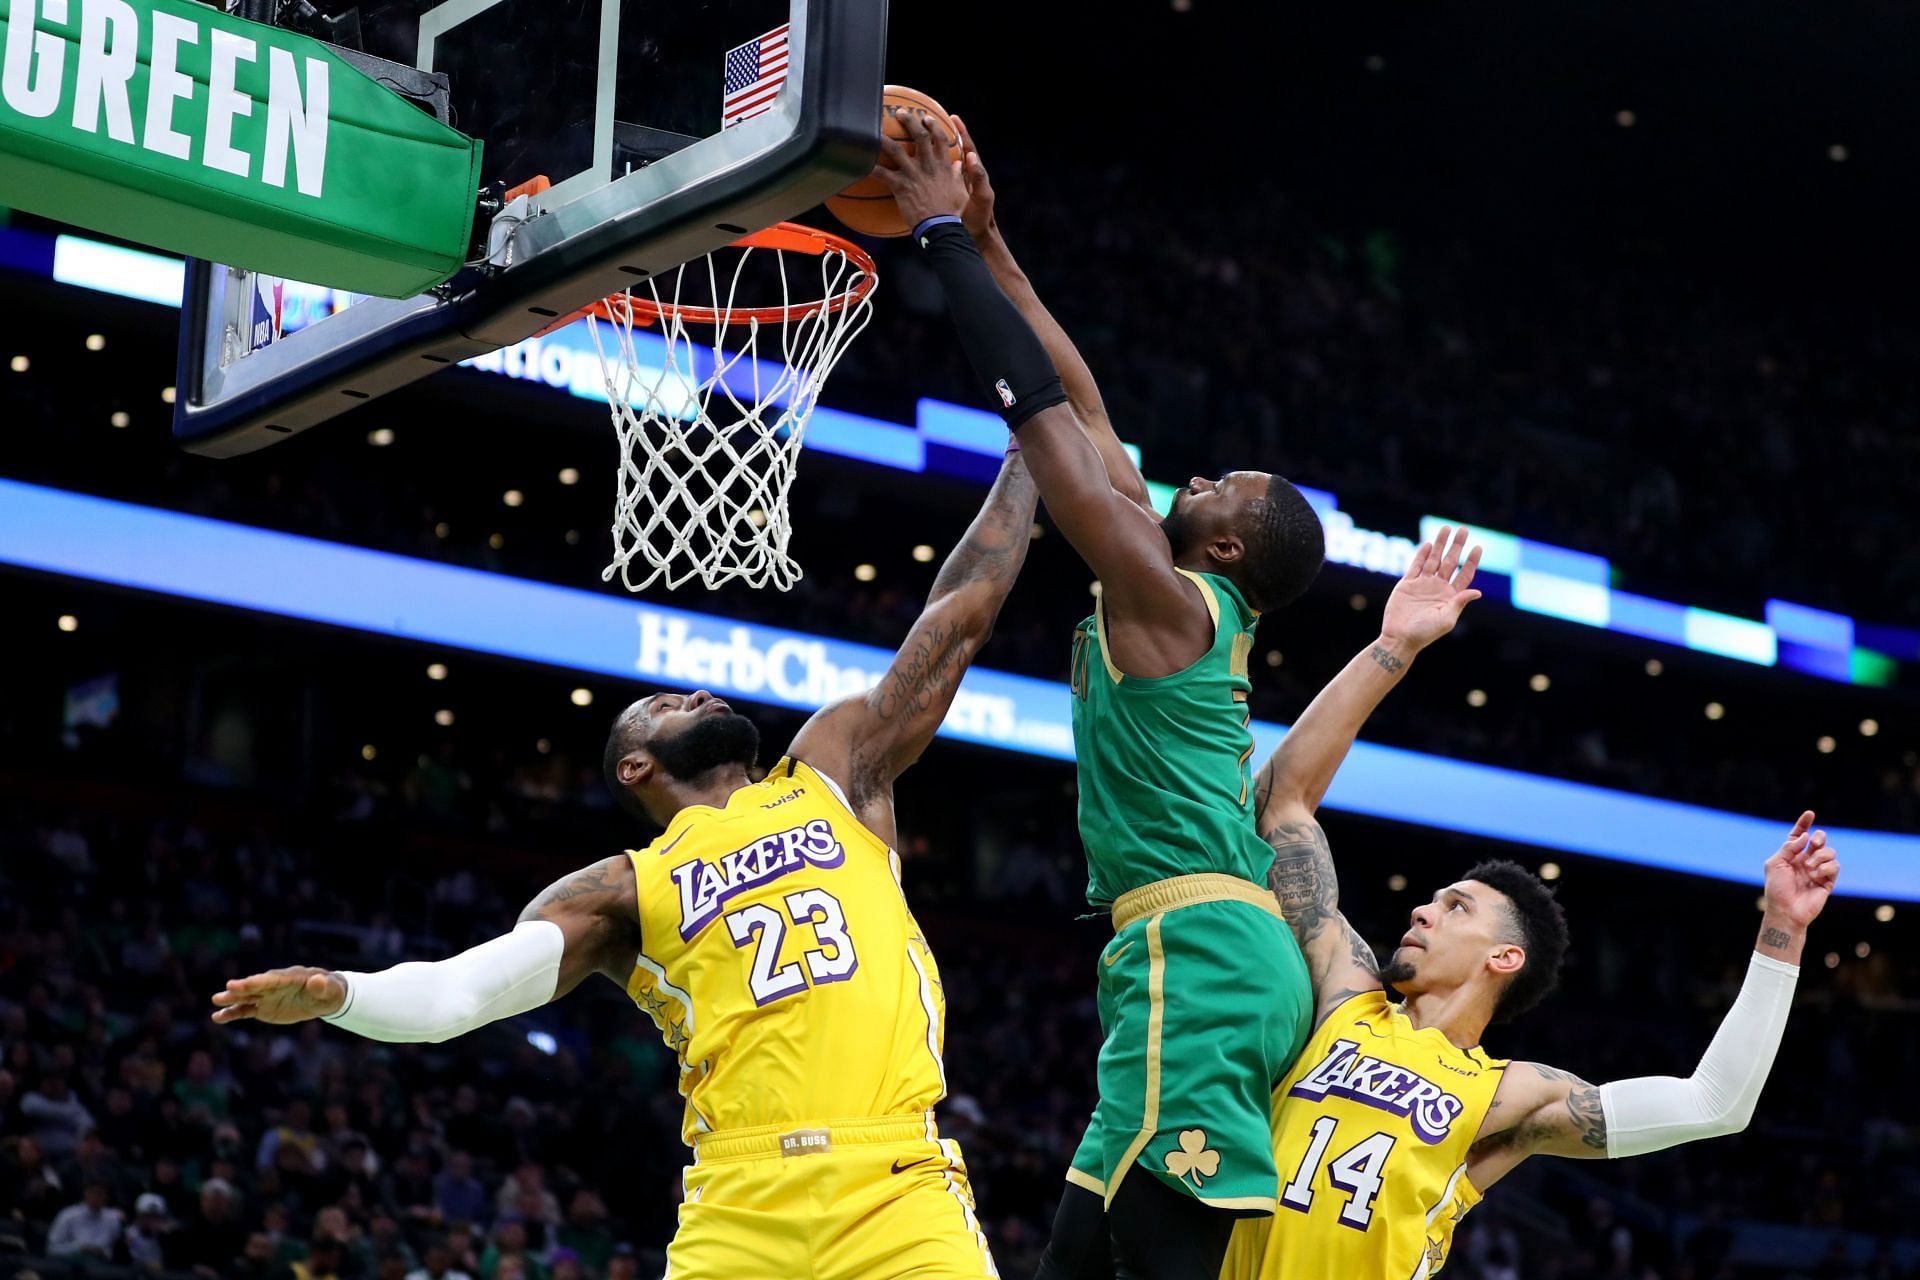 Jaylen Brown of the Boston Celtics muscles his way over LeBron James for a dunk